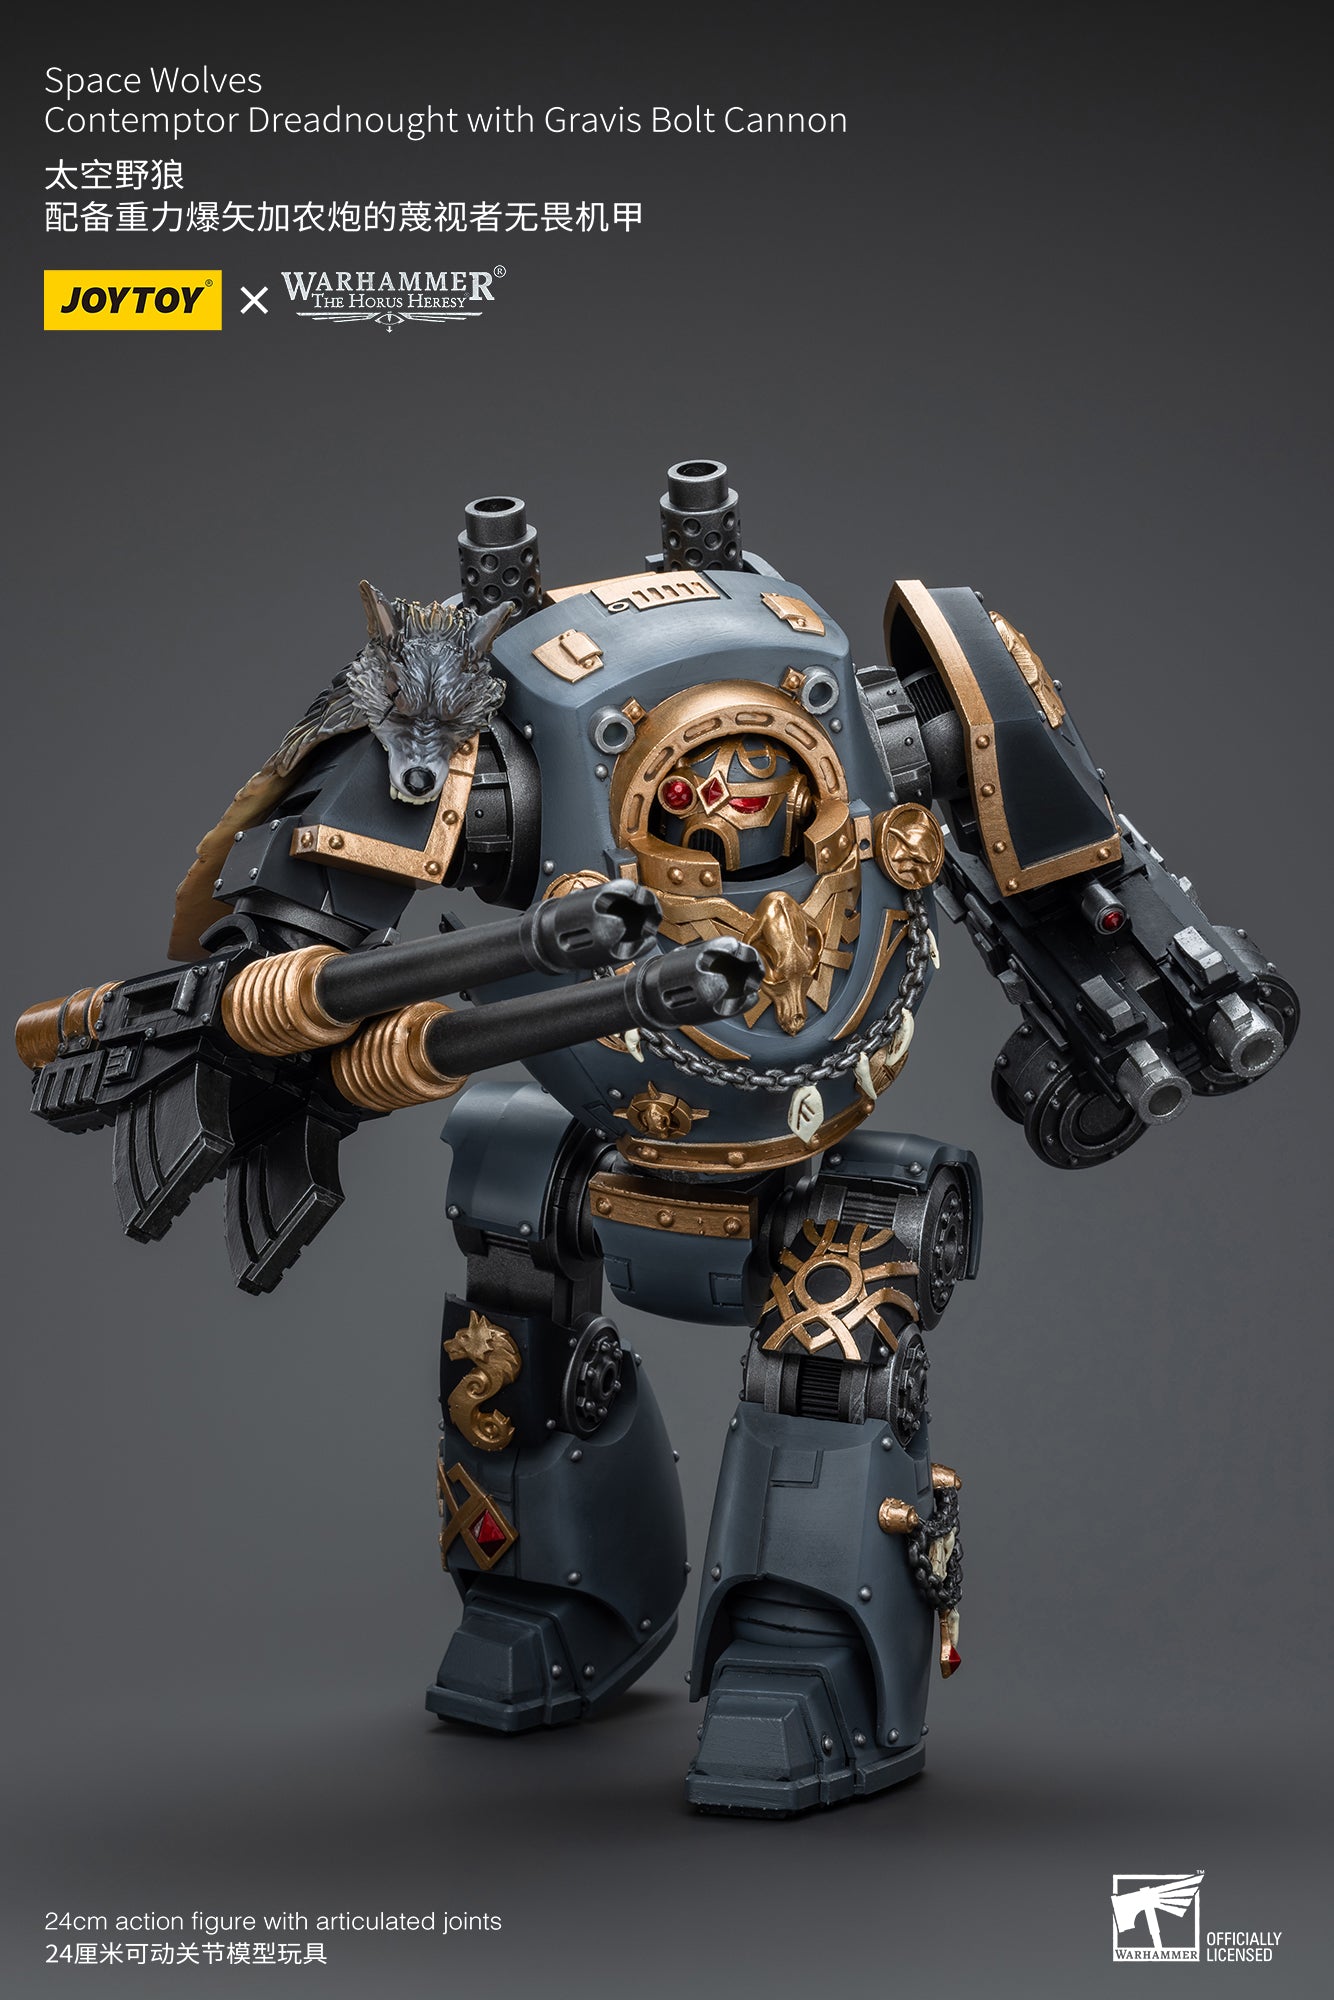 Warhammer: Horus Heresy: Space Wolves: Contemptor Dreadnought with Gravis Bolt Cannon: Joy Toy